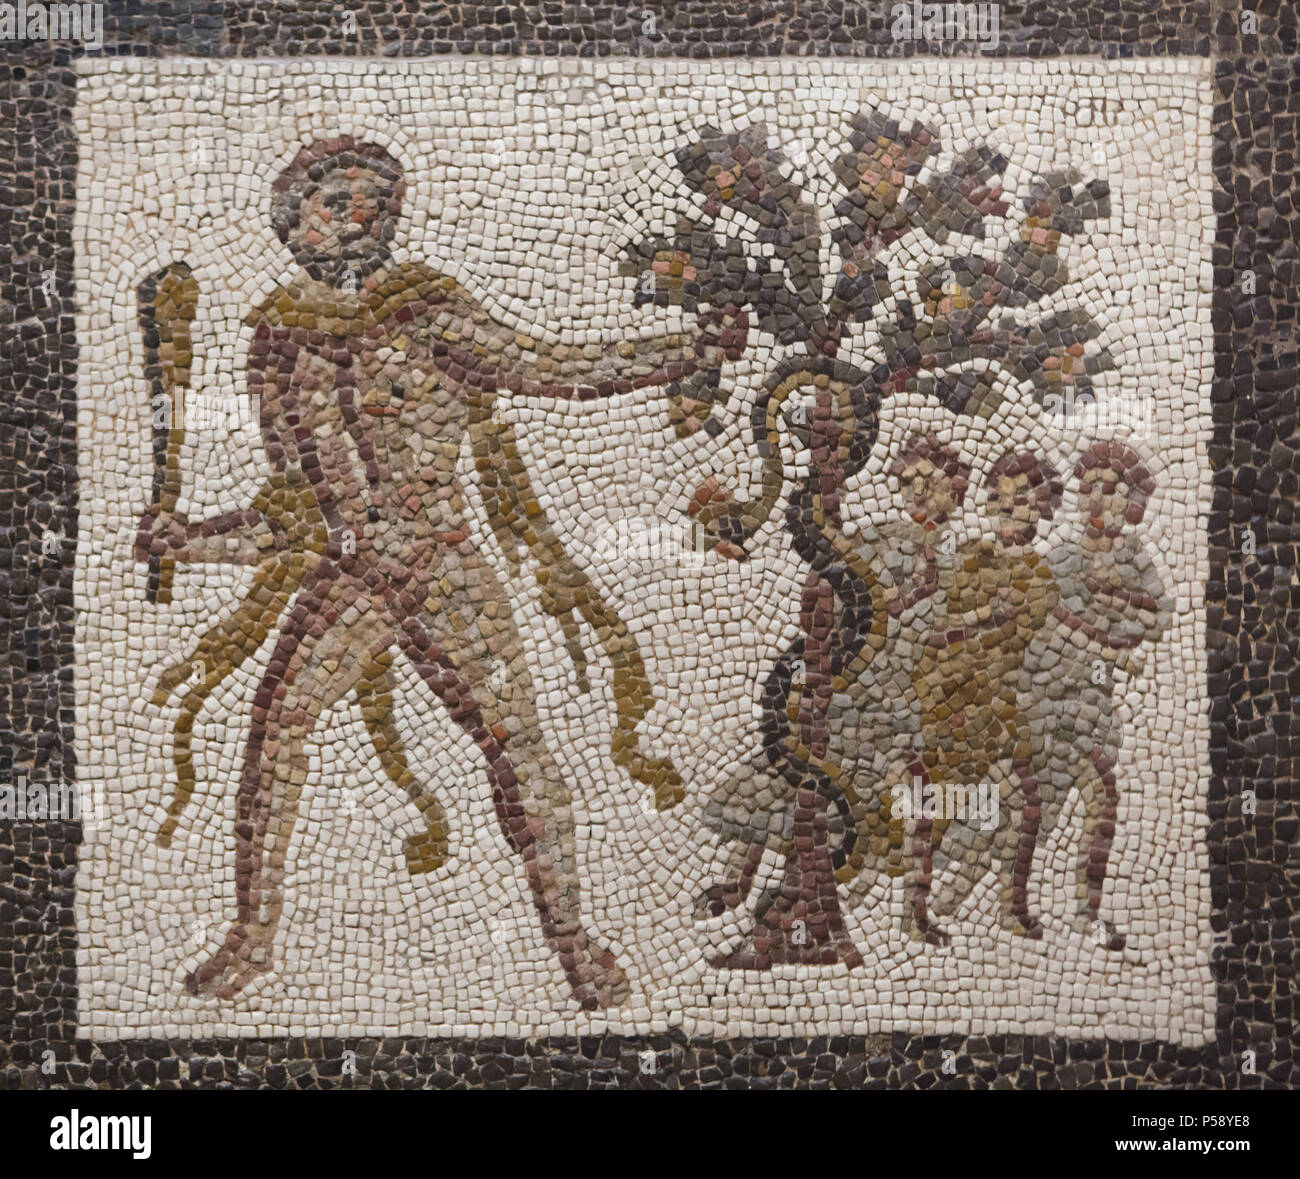 Heracles stealing the golden apples from the Garden of the Hesperides. Labours of Heracles depicted in the Roman mosaic dated from the 3rd century AD from Llíria (Valencia Province, Spain) on display in the National Archaeological Museum (Museo Arqueológico Nacional) in Madrid, Spain. Stock Photo